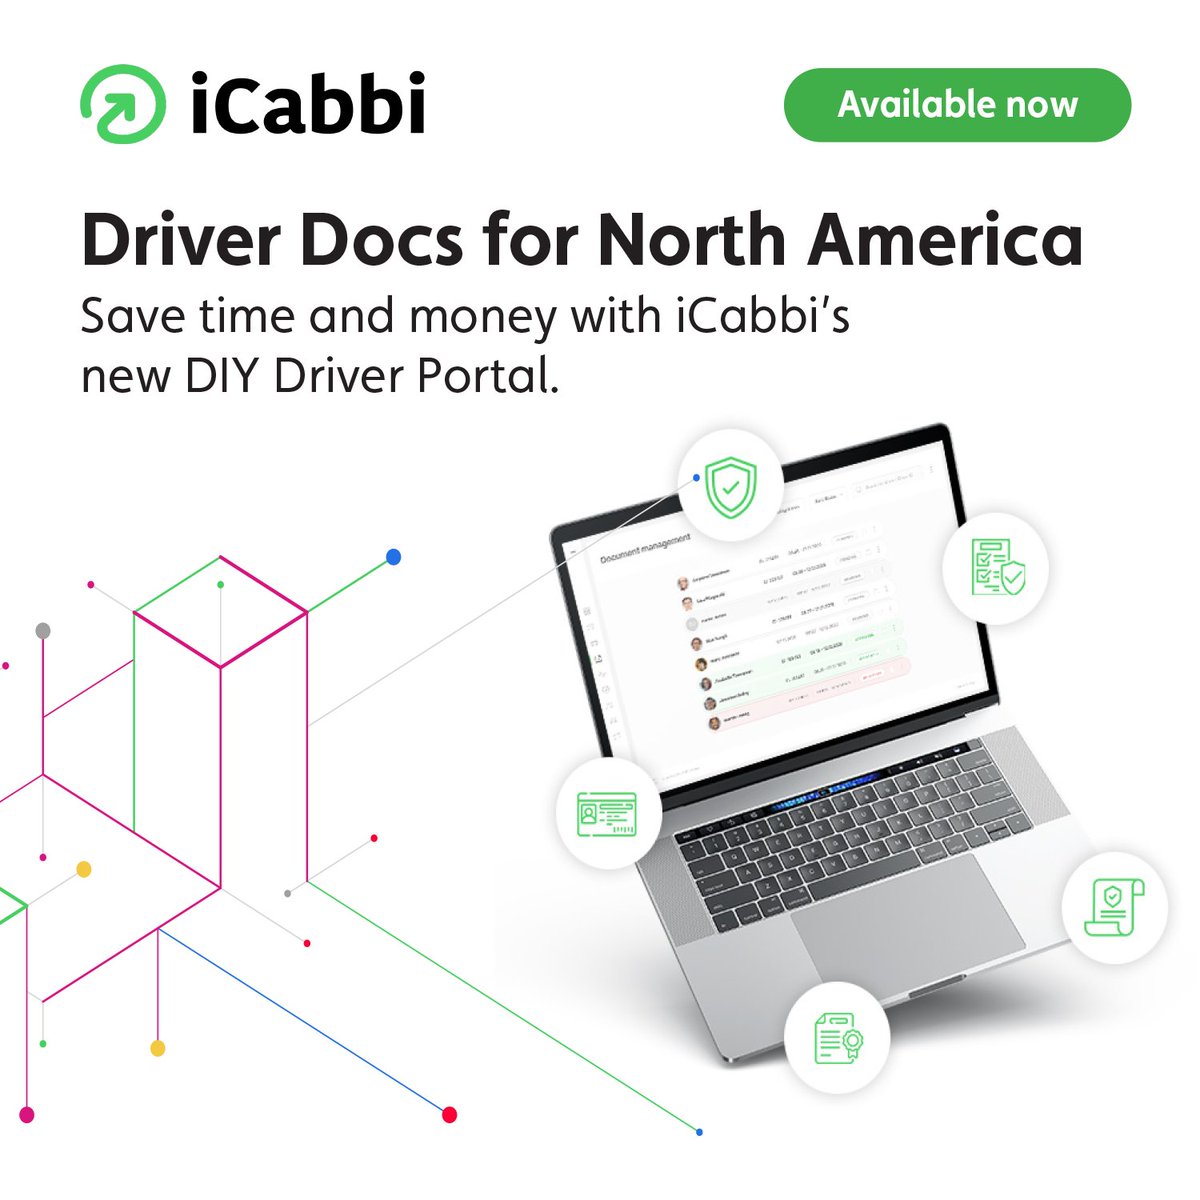 Driver Docs is now available for North American customers! 🙌 Enjoy saving time and money with faster, easier driver onboarding and record management. Find out more here: icabbi.com/platform/drive… #icabbi #taxi